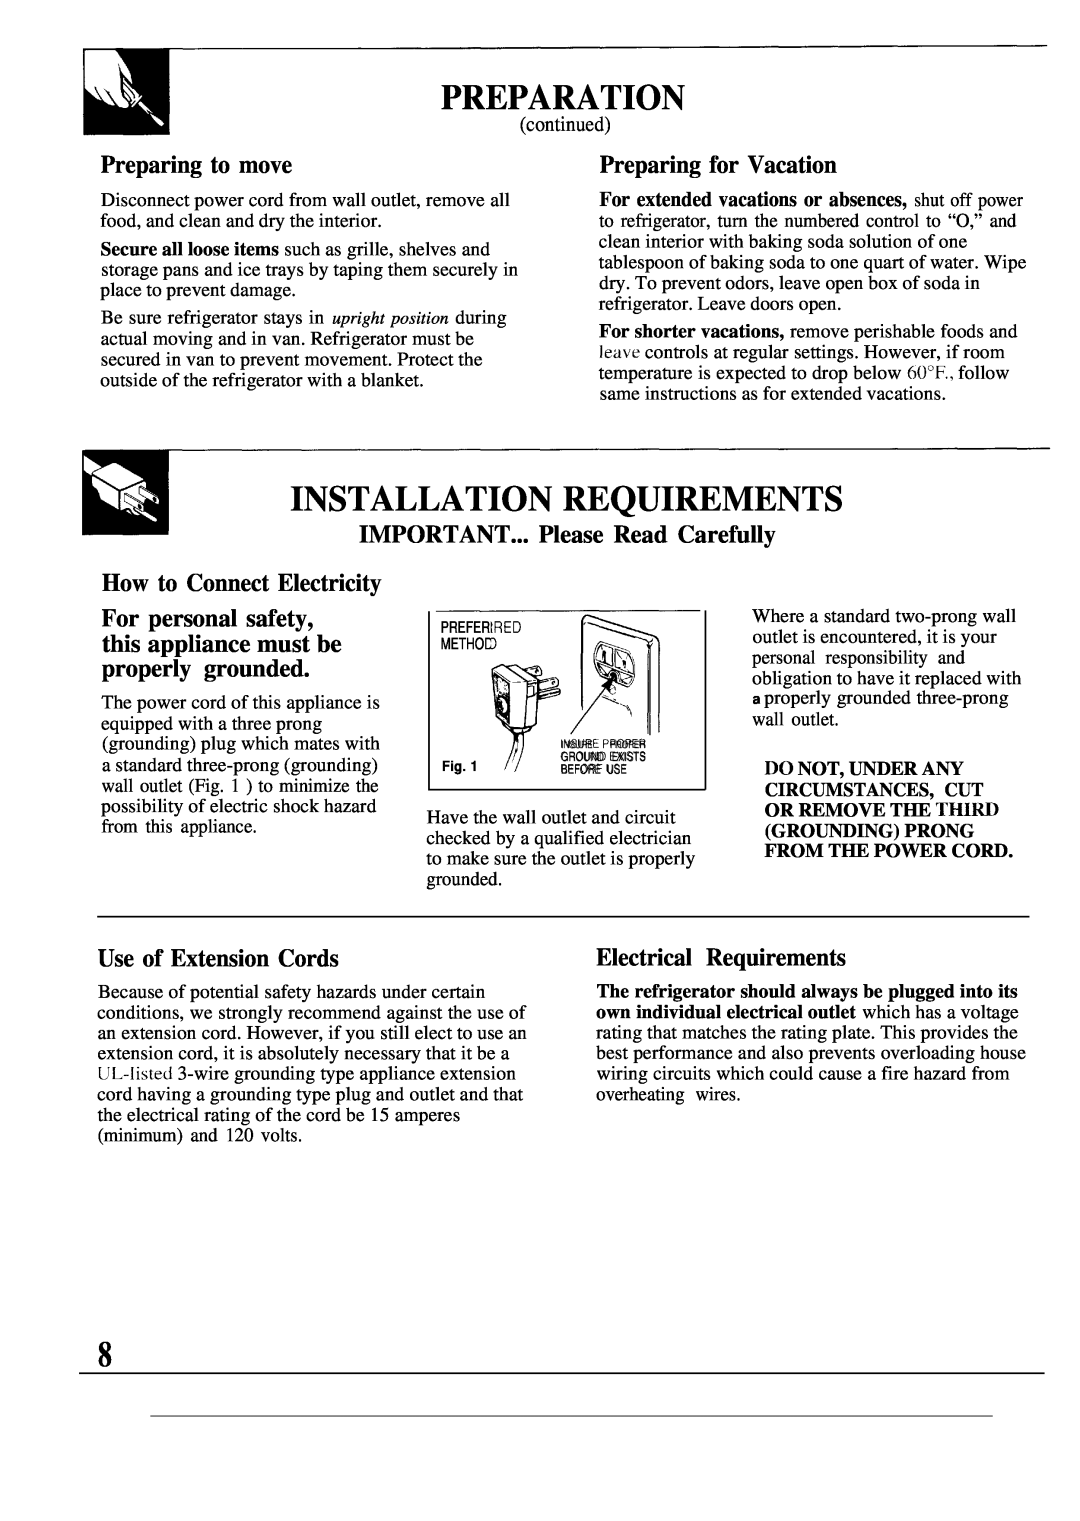 GE TBX12 Installation Requirements, Preparing to move, Preparing for Vacation, IMPORTANT... Please Read Carefully 